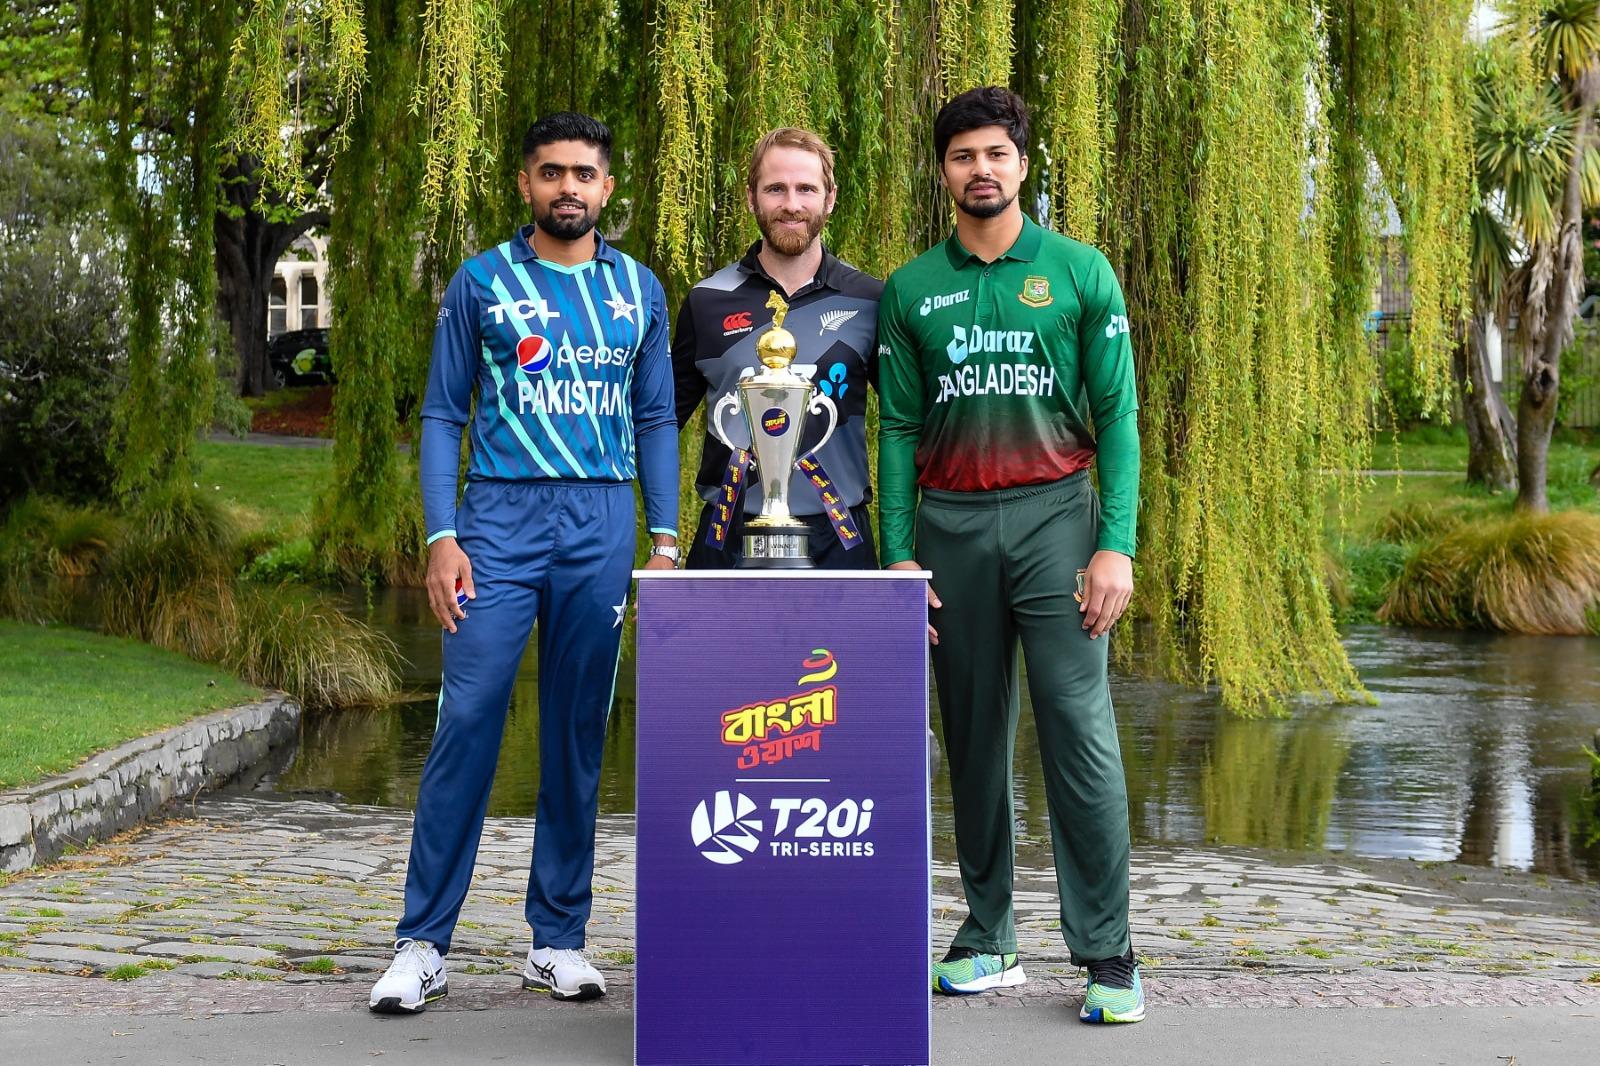 Pakistan and New Zealand Trophy has been Revealed 2022